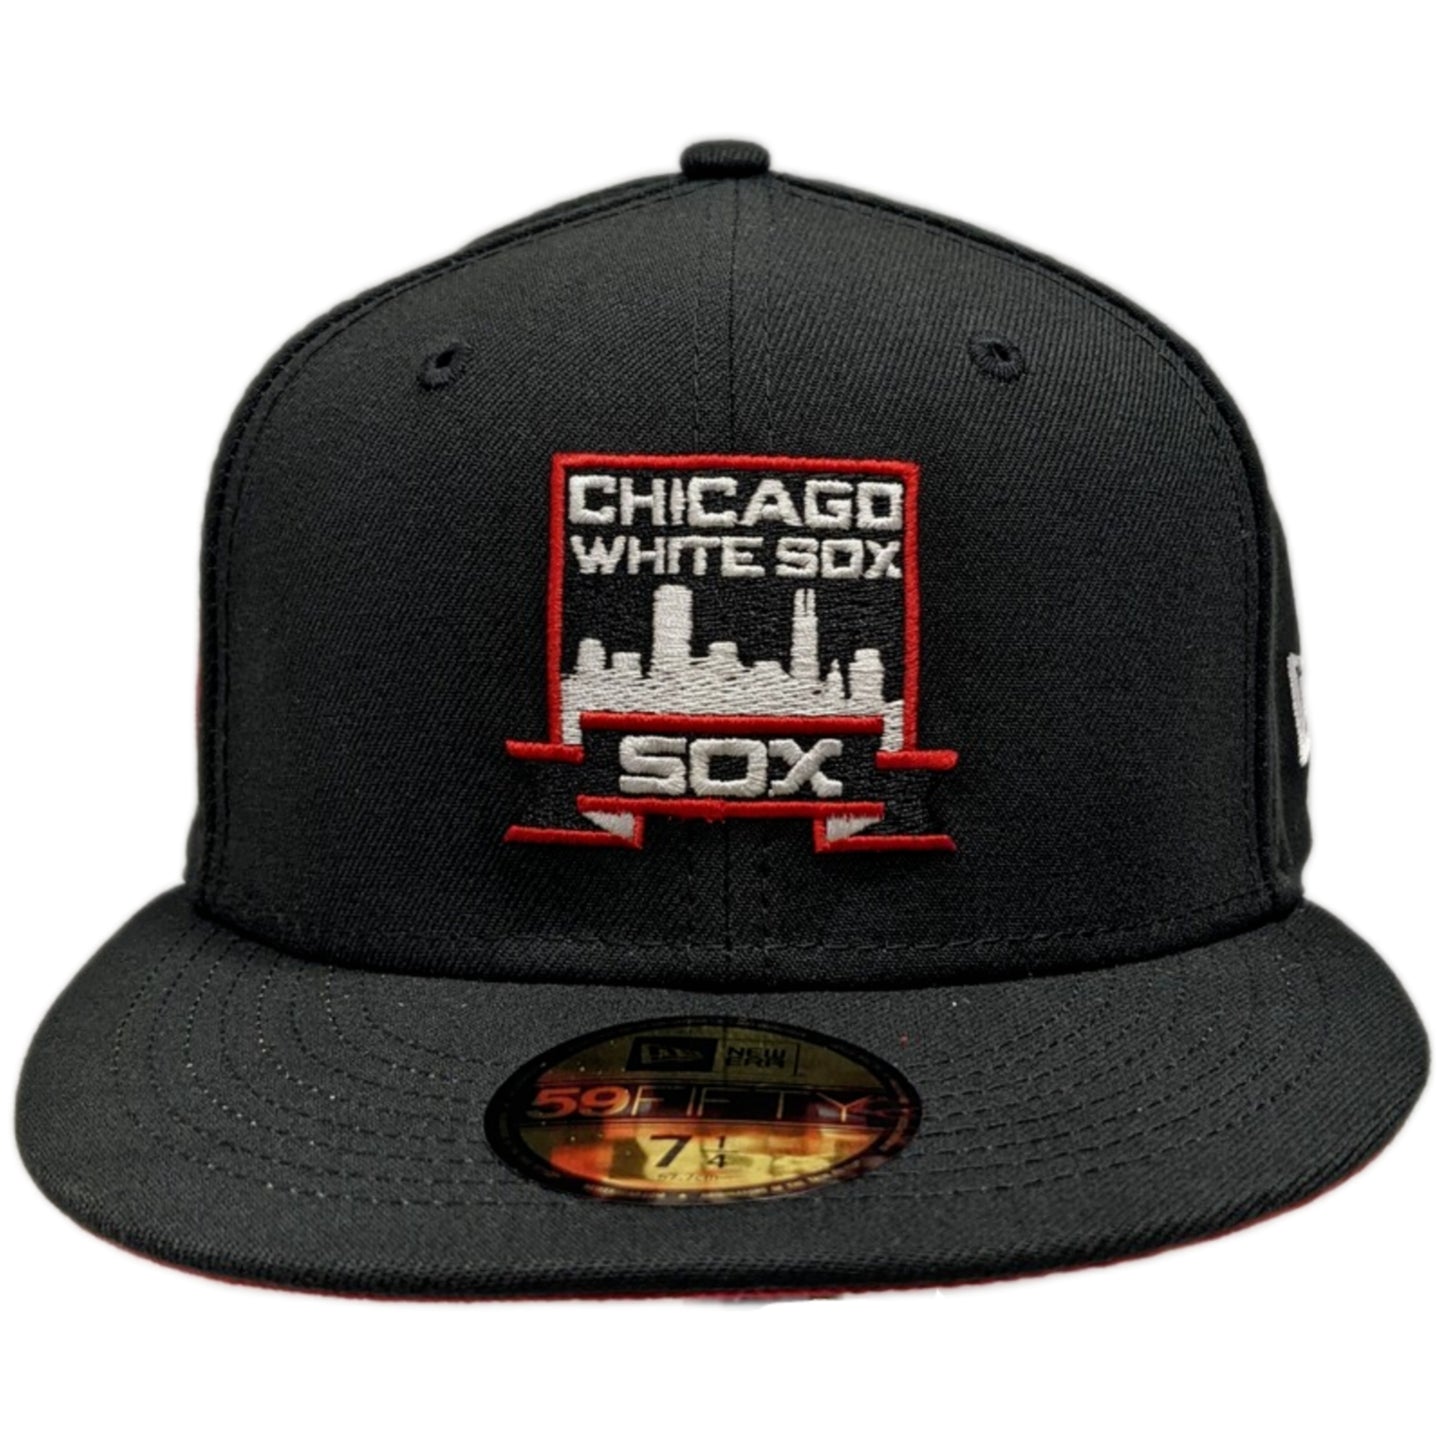 Chicago White Sox New Era Black 1983 All Star Skyline Black 59FIFTY Fitted Hat